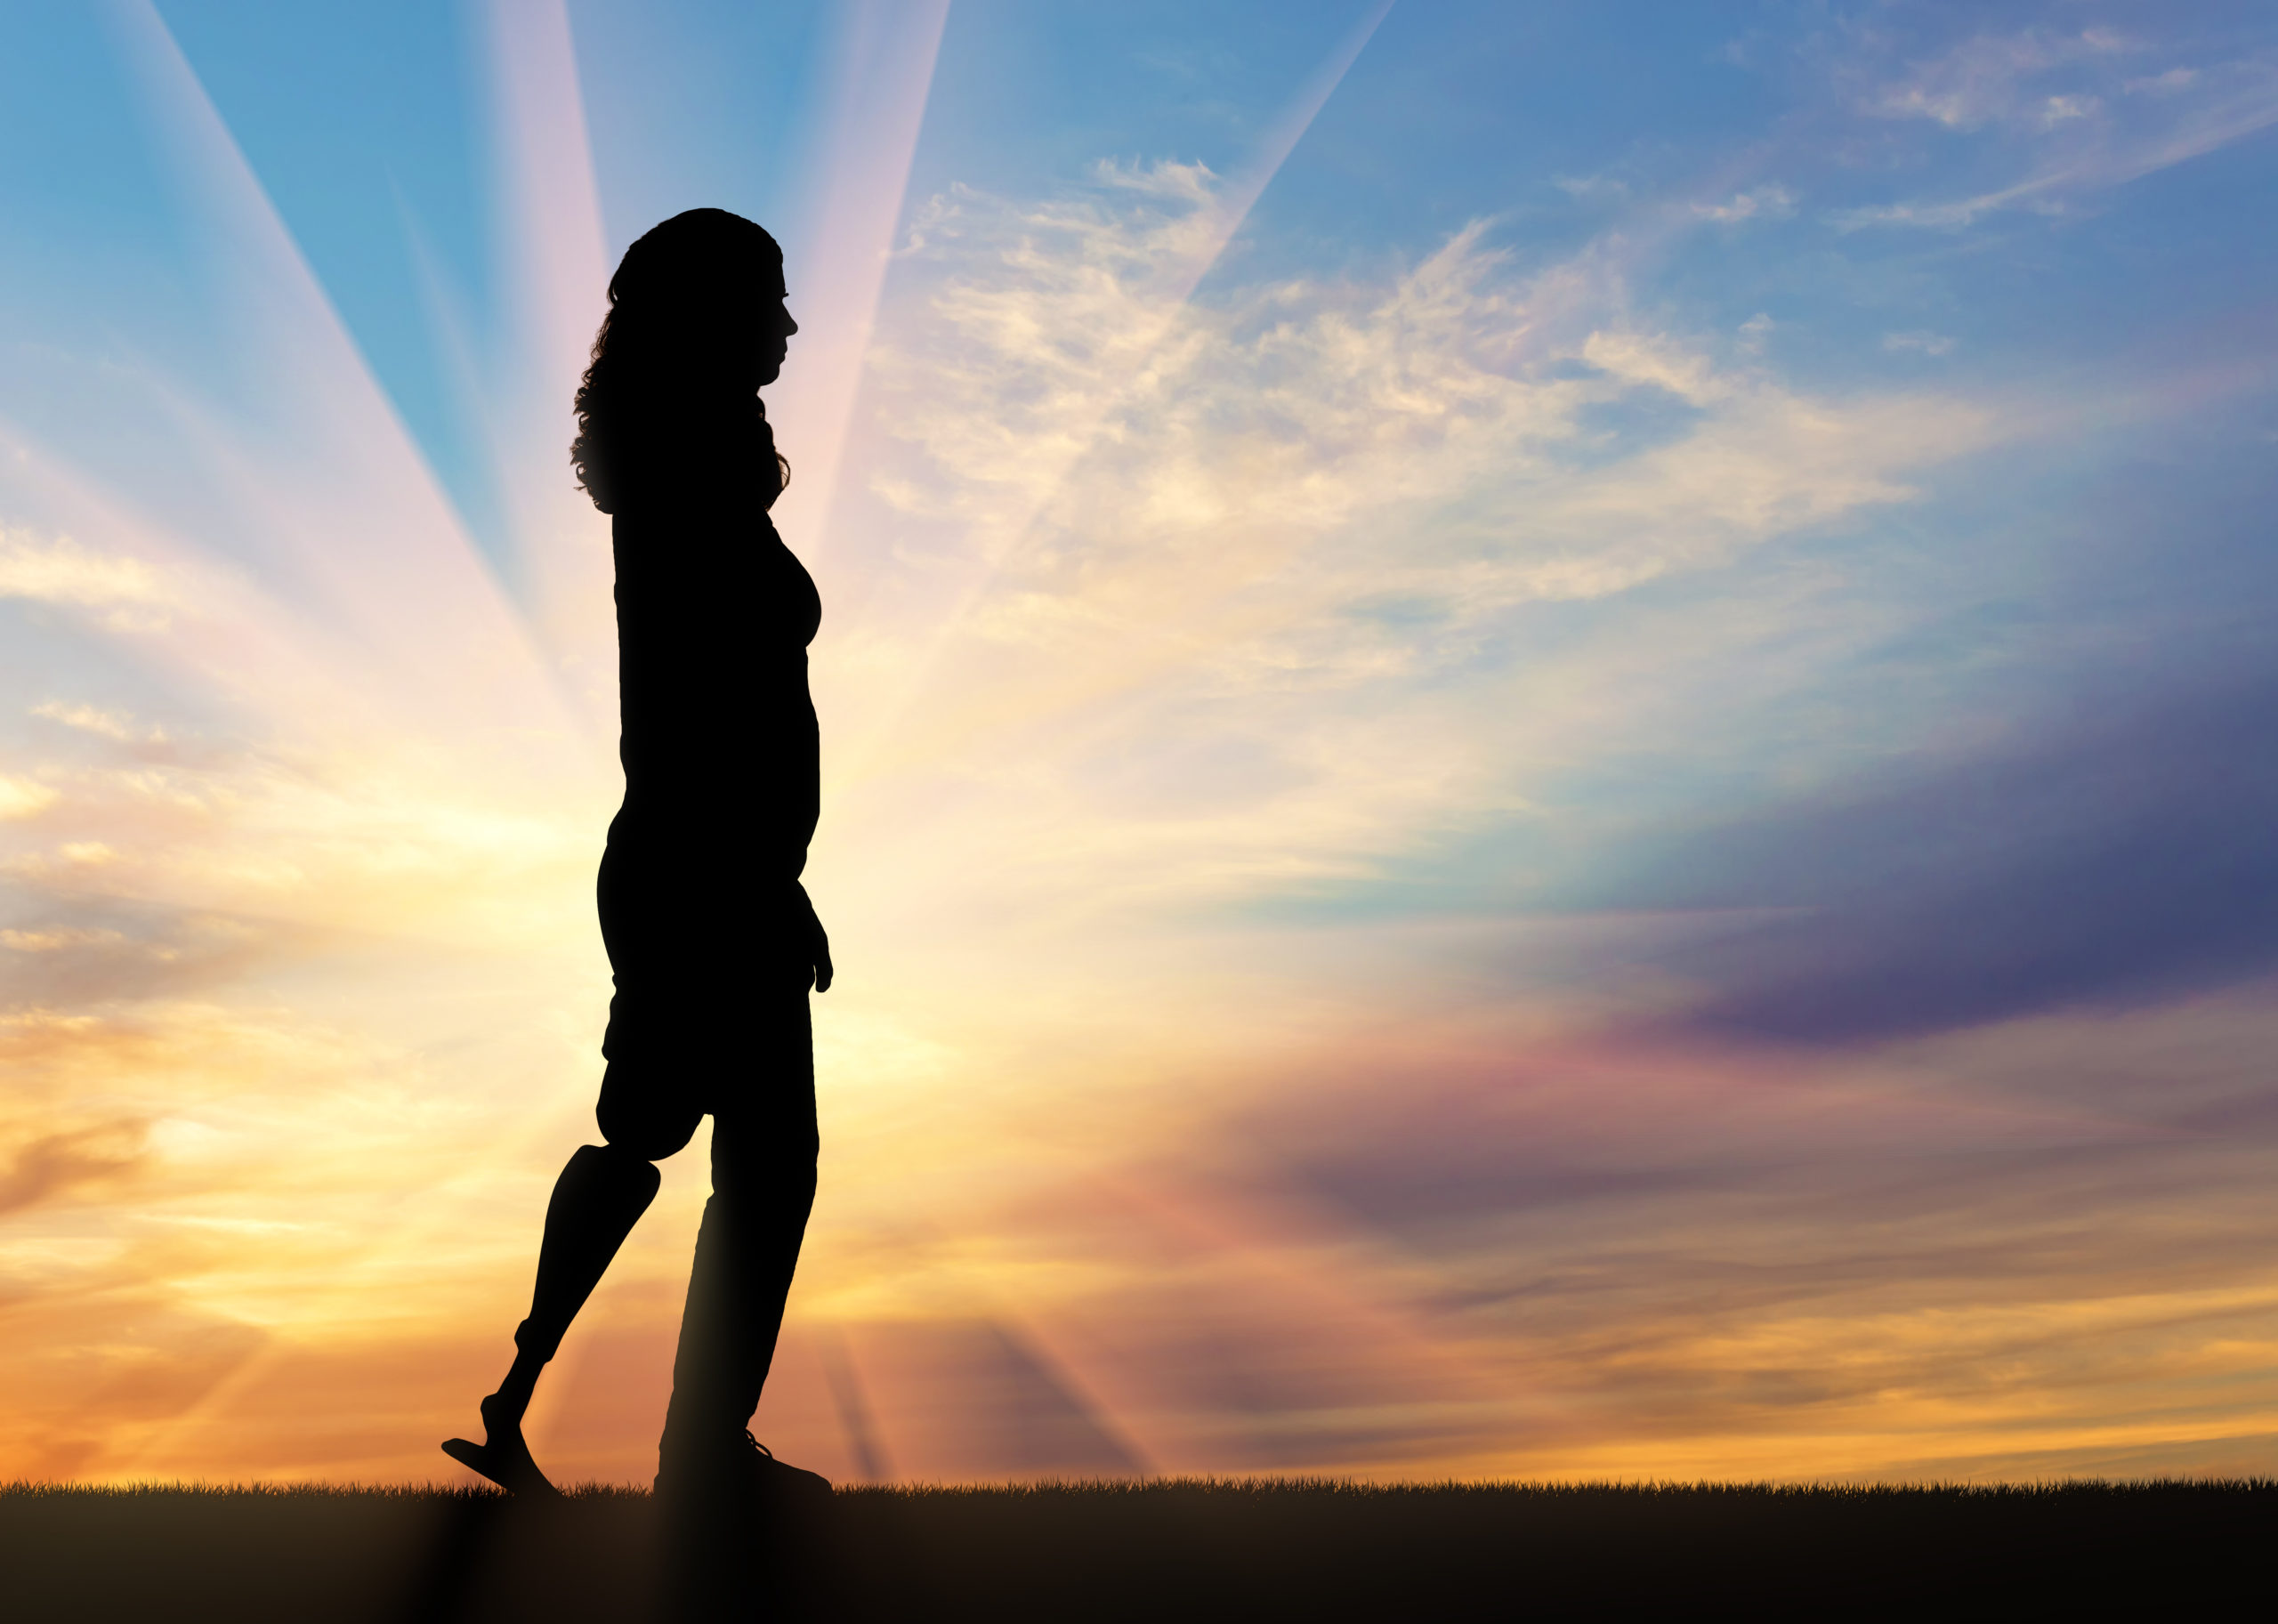 Woman in silhouette walking with a prosthetic leg against a sunset sky